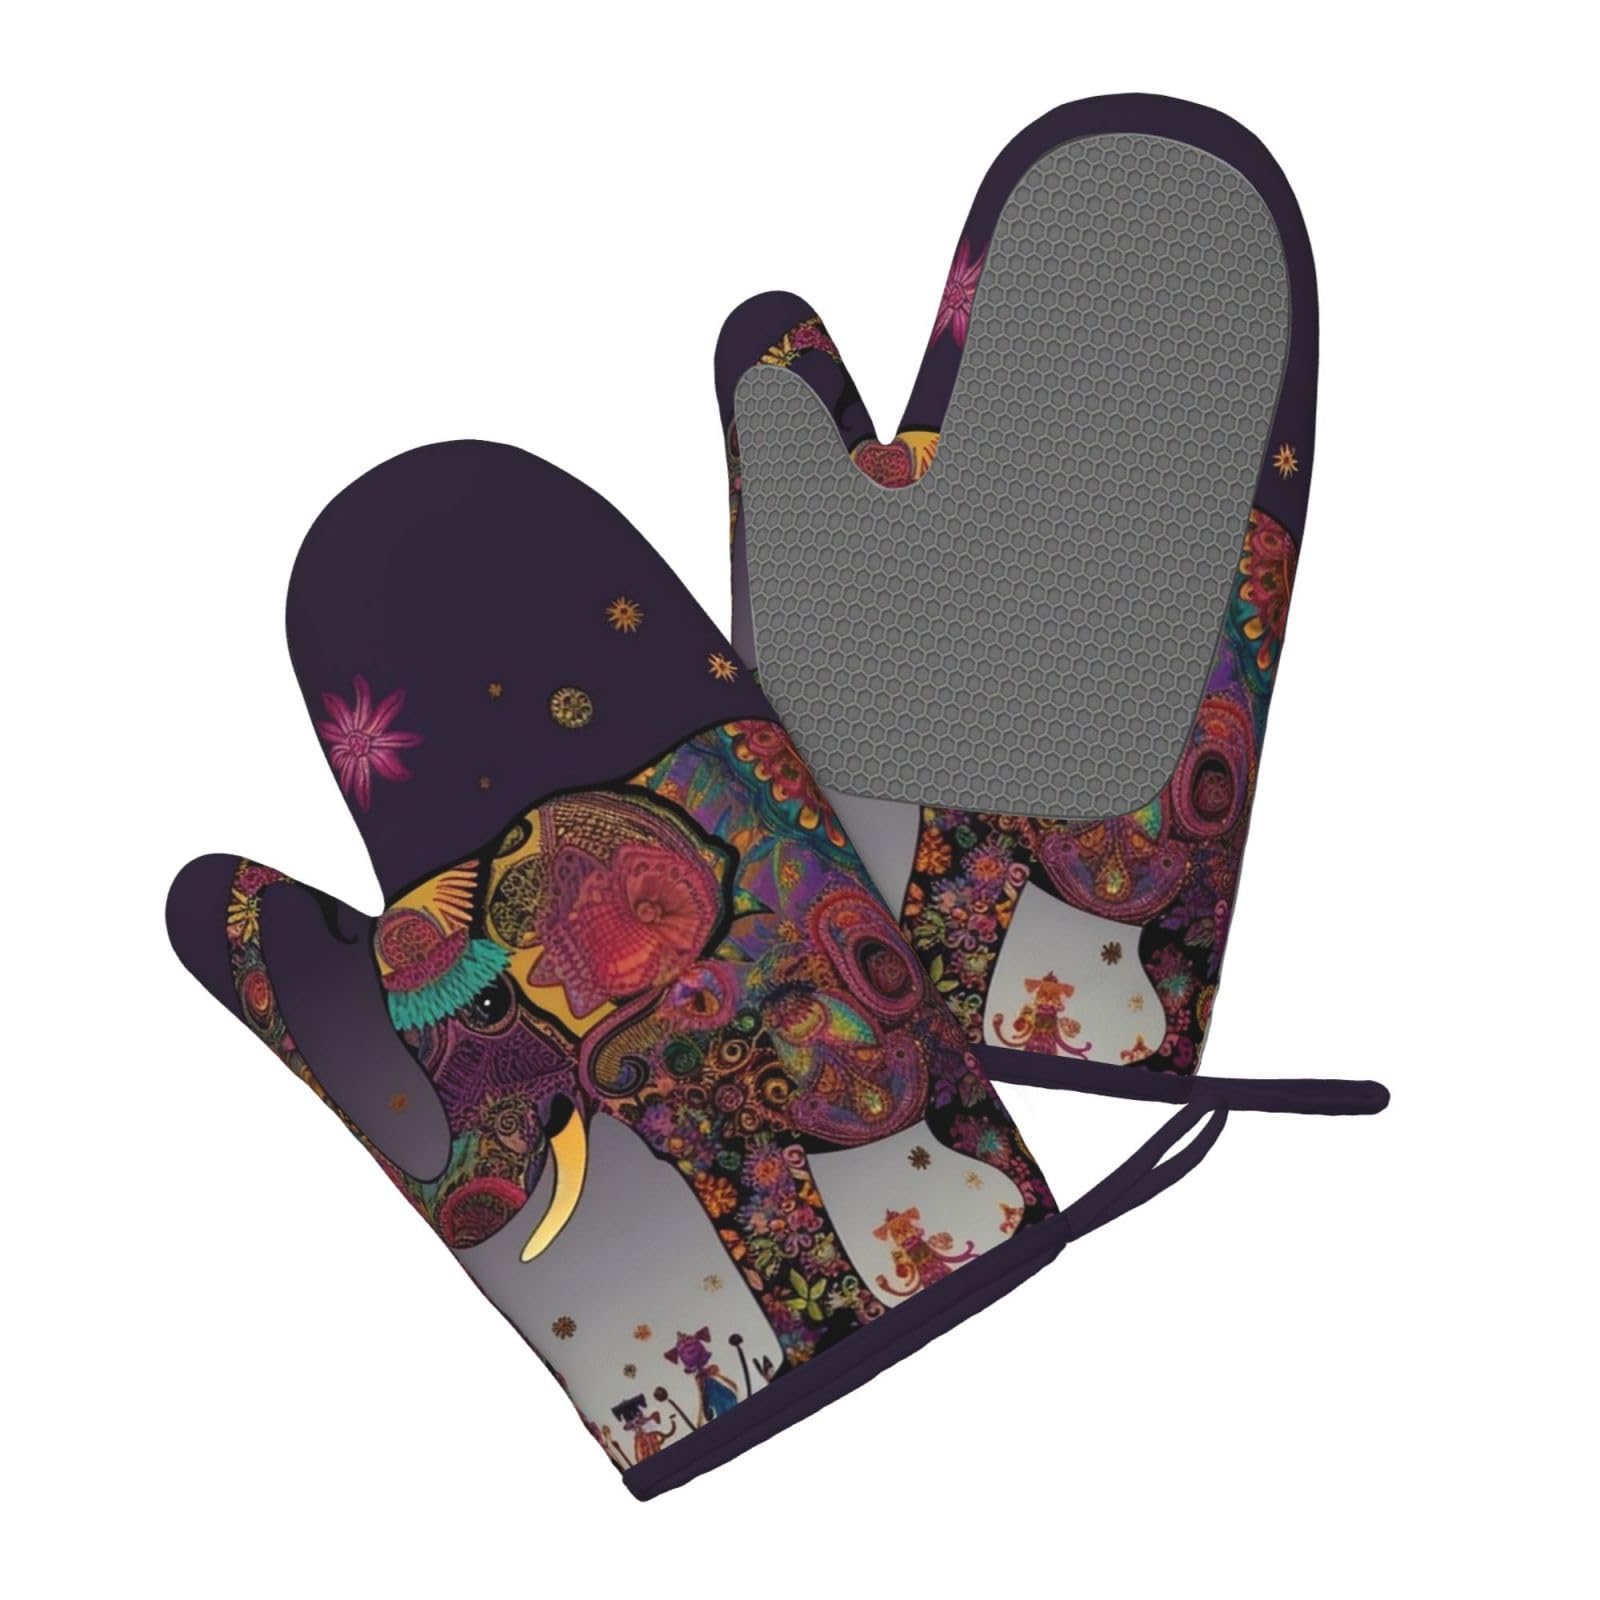 Colorful Tribal Floral Elephant Printed Oven Mitts Heat Resistant Oven Gloves Non-Slip Silicone Kitchen Gloves for Cooking Baking BBQ Gloves 1 Pair